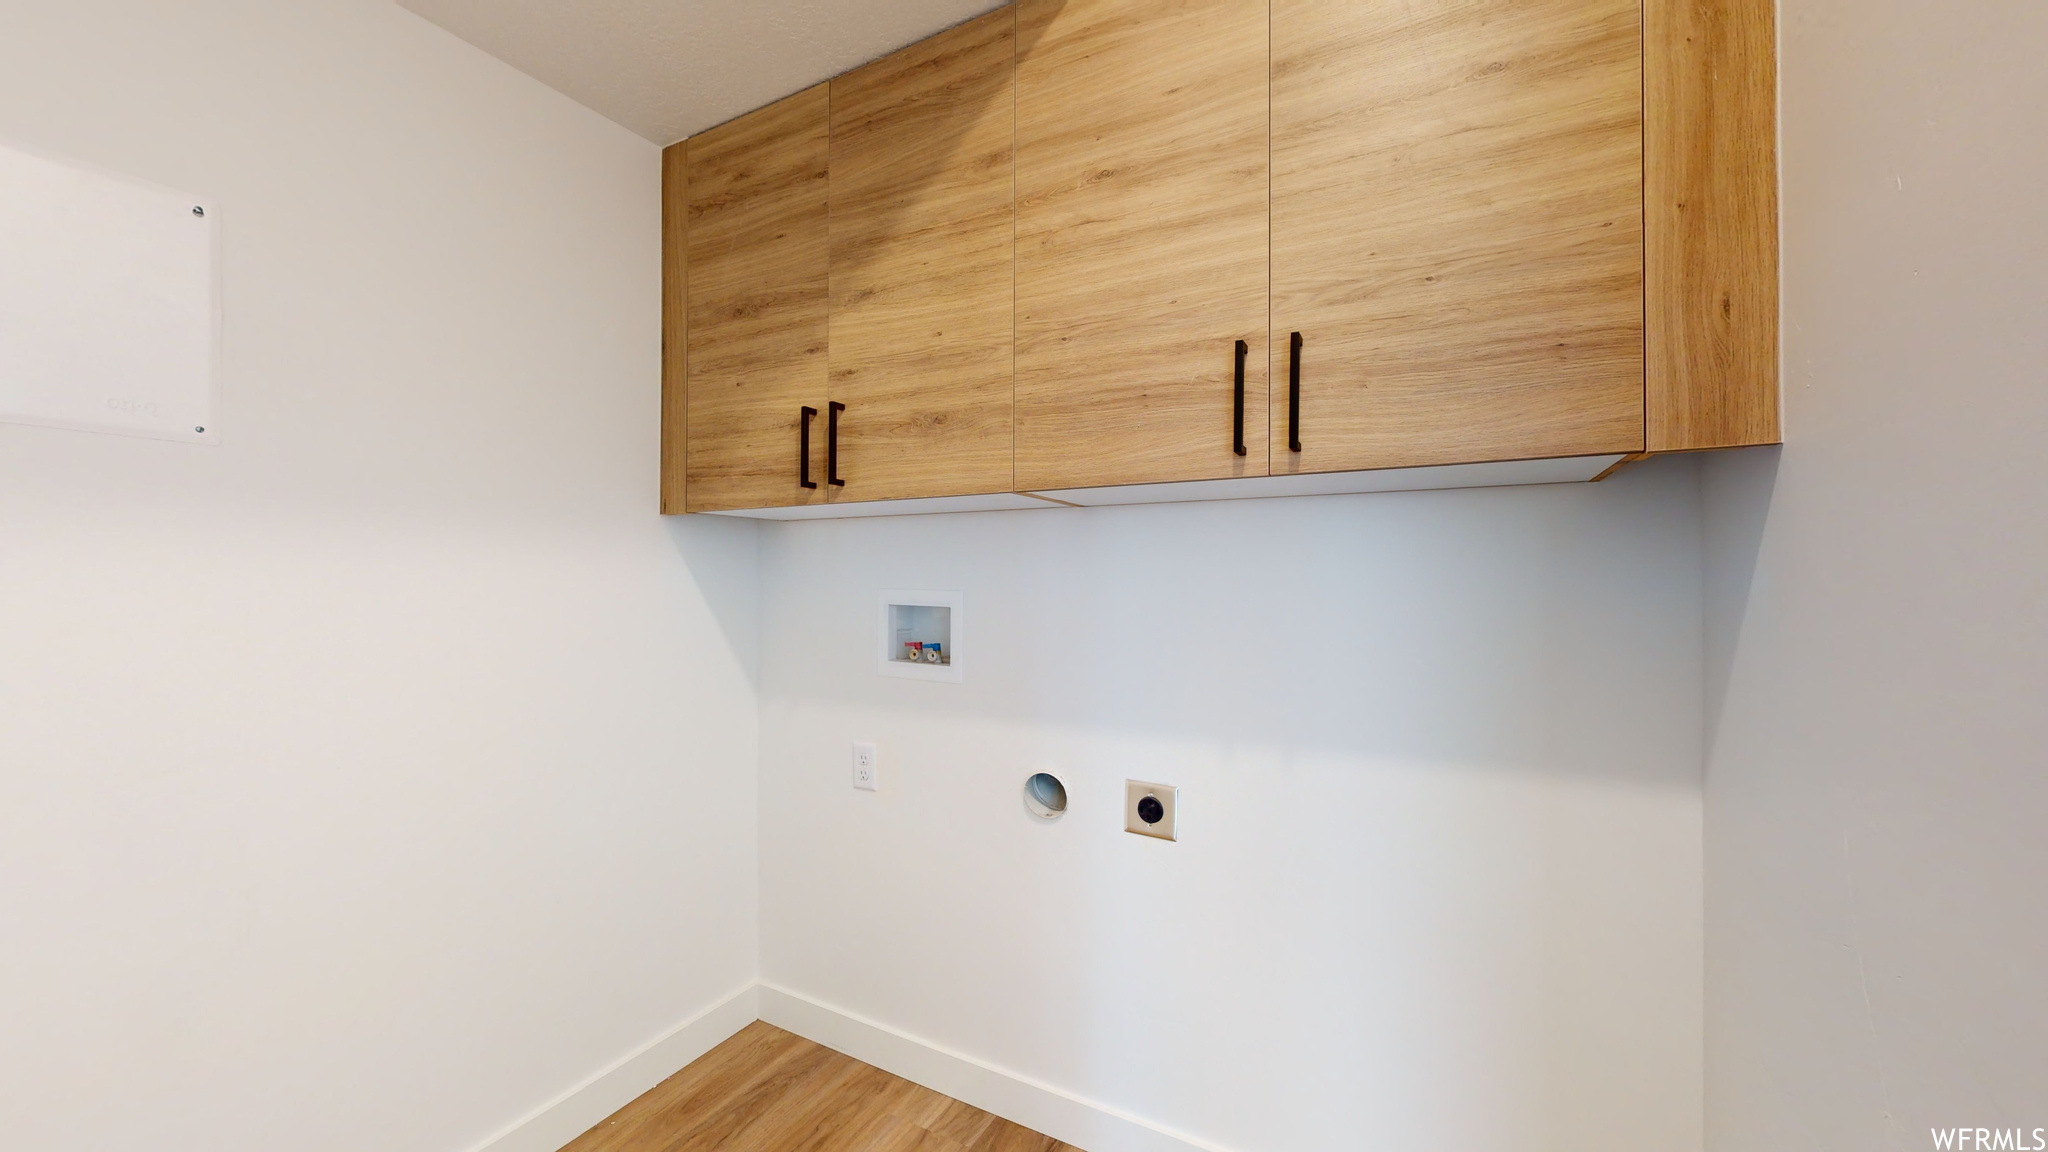 Laundry area featuring cabinets, light hardwood / wood-style floors, hookup for an electric dryer, and washer hookup